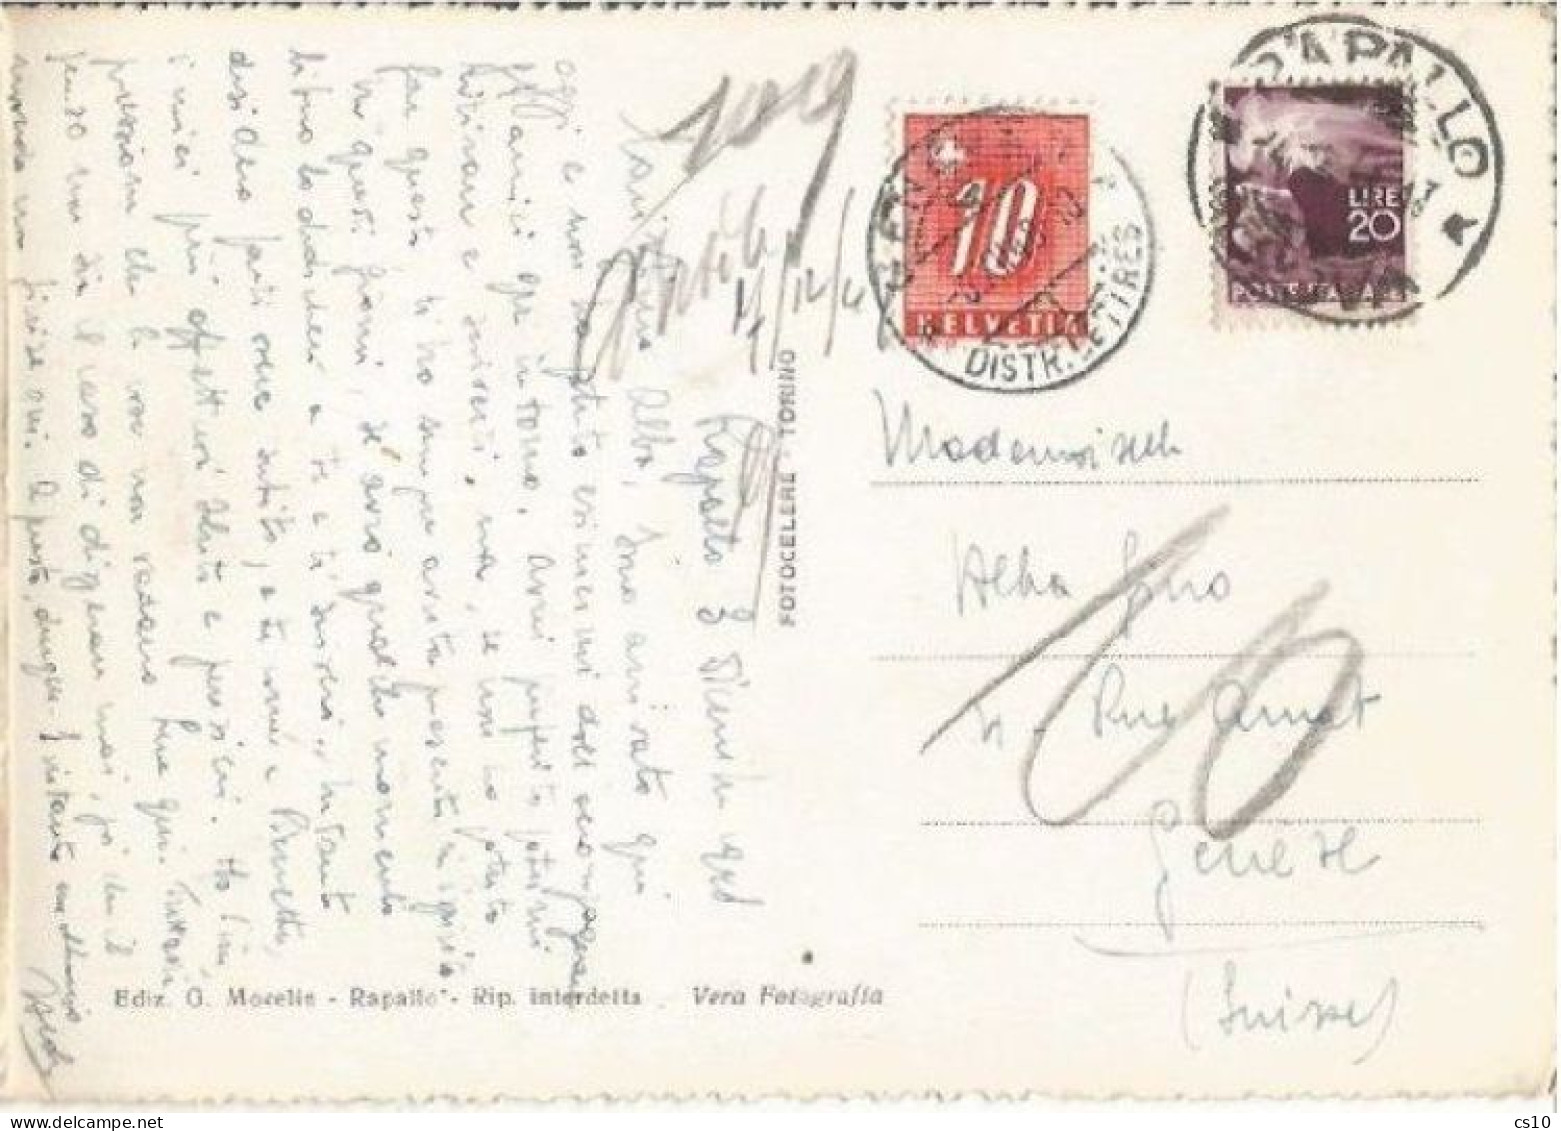 Suisse Postage Due Tax C.10 On Pcard Italy 1948 - Portomarken